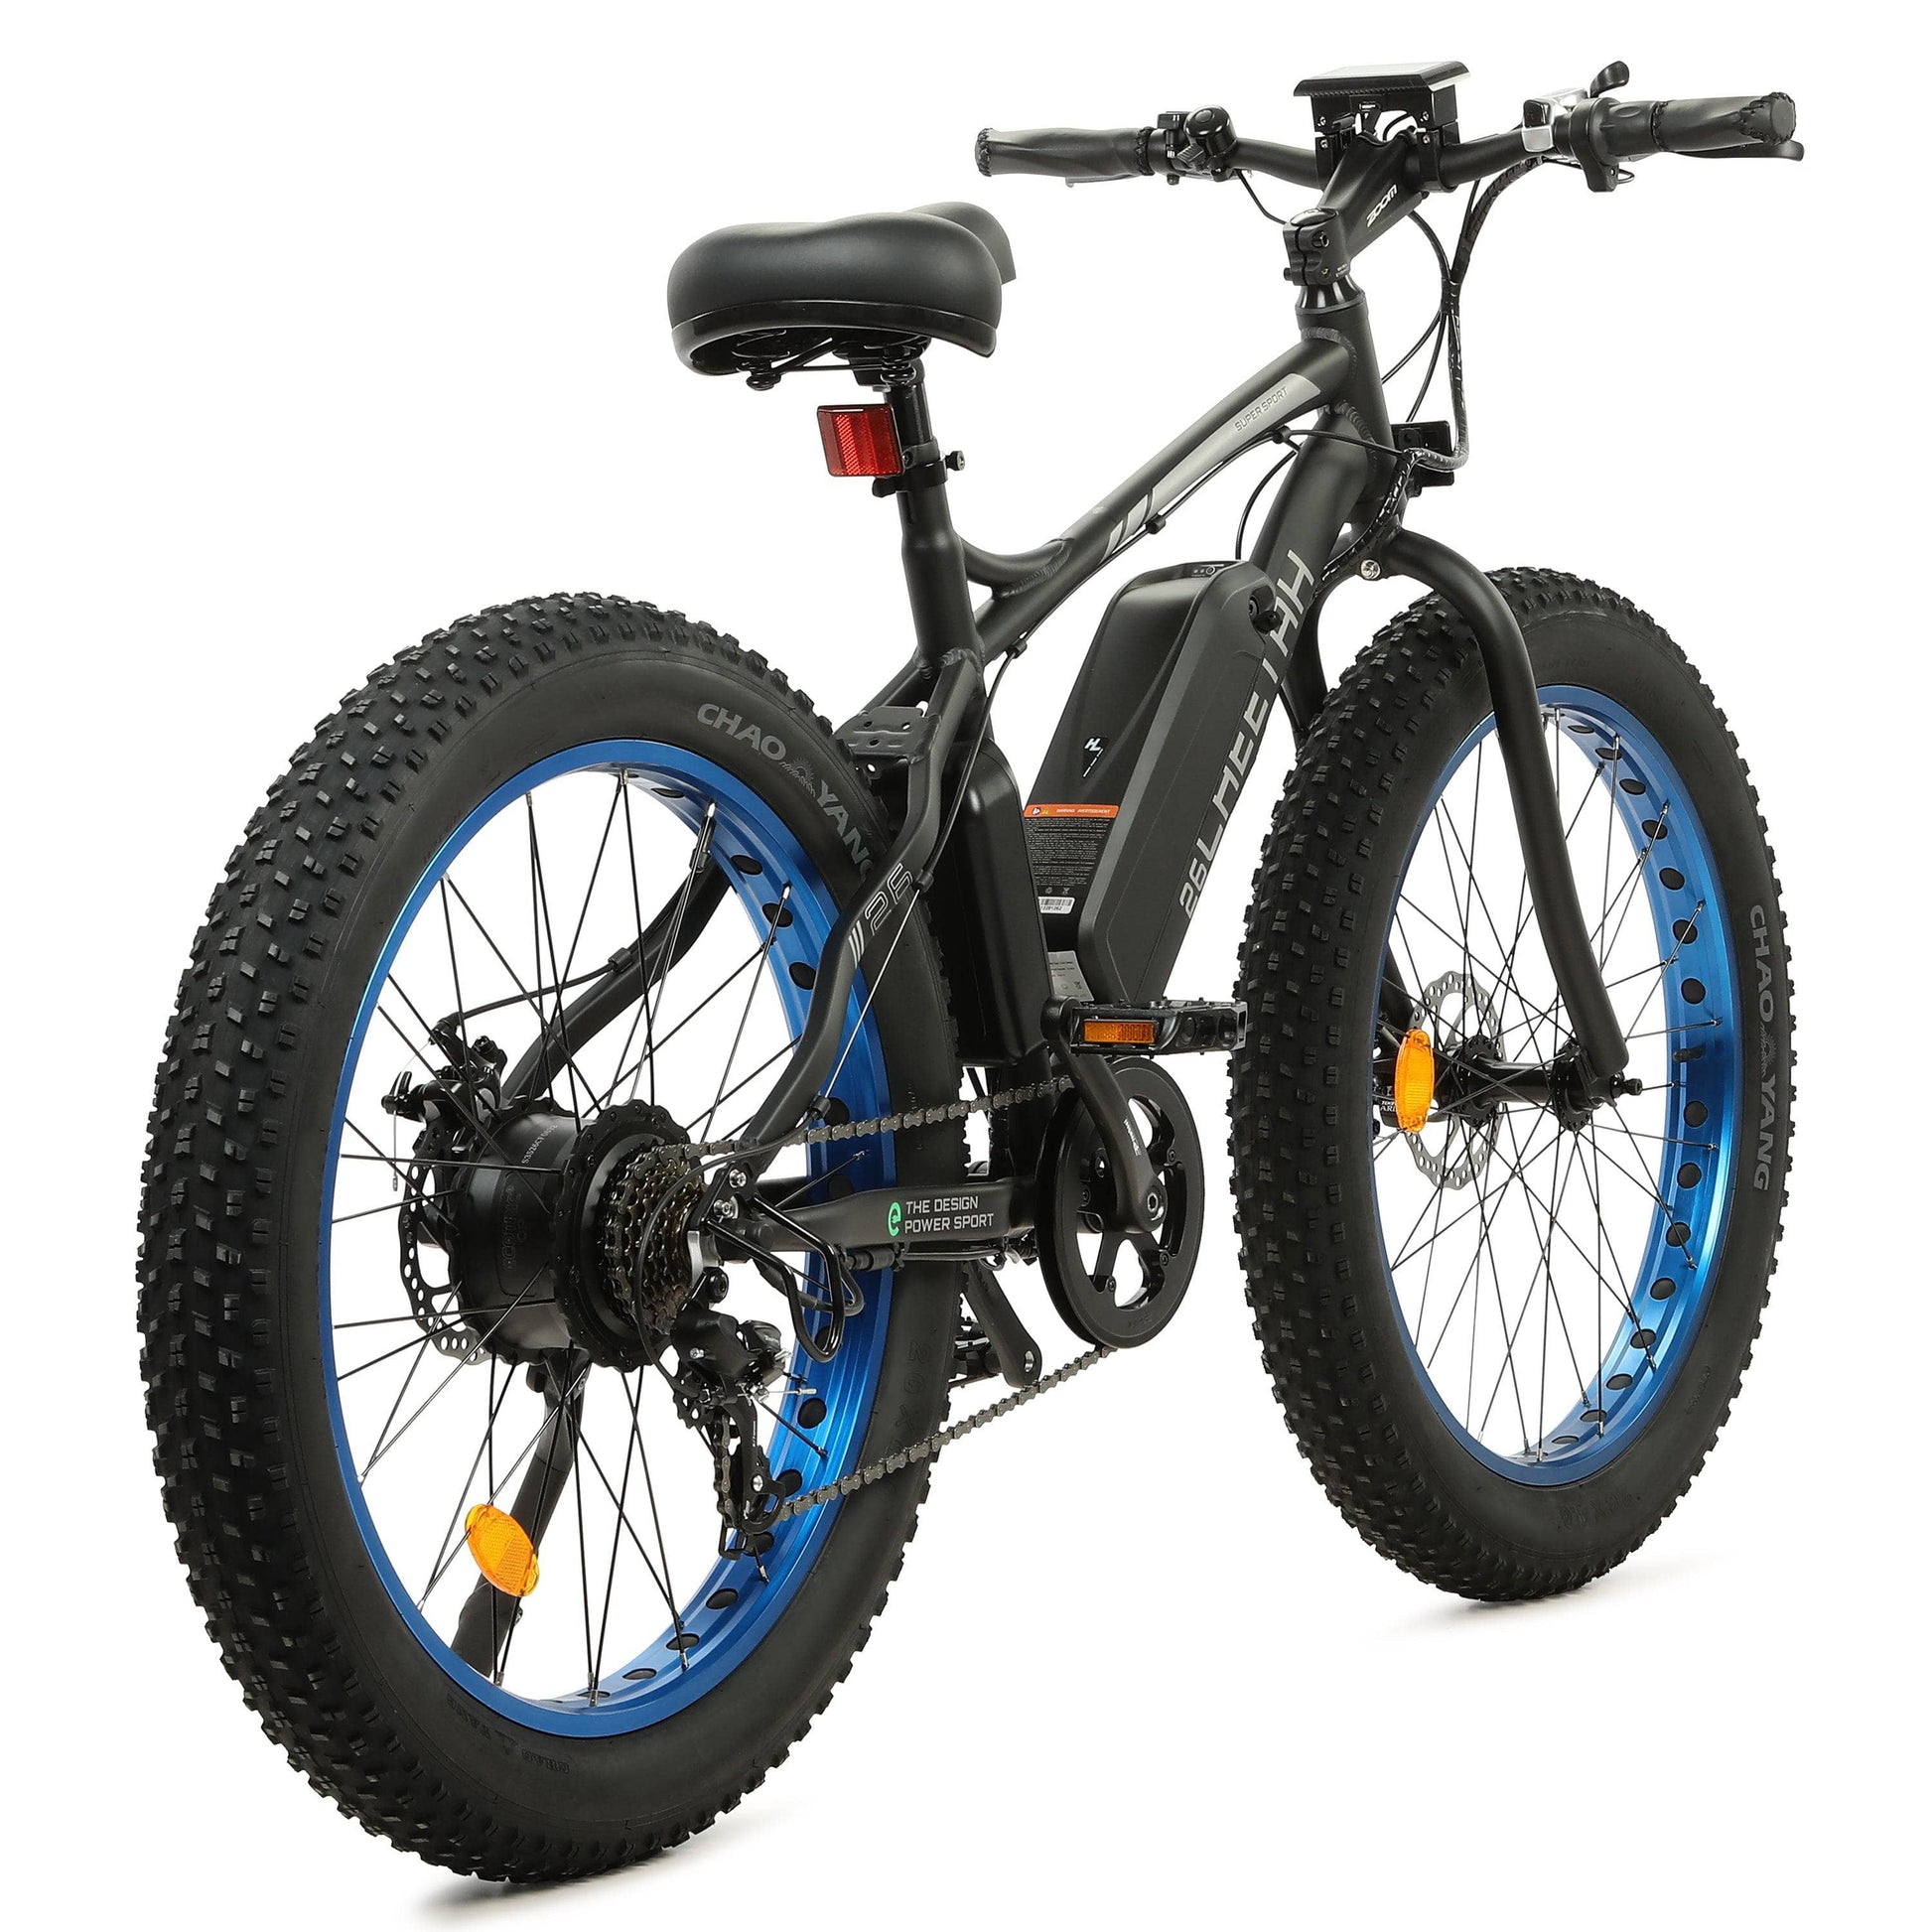 Ecotric Electric Bikes Ecotric 26" 36V 500W Fat Tire Beach Snow Electric Bike